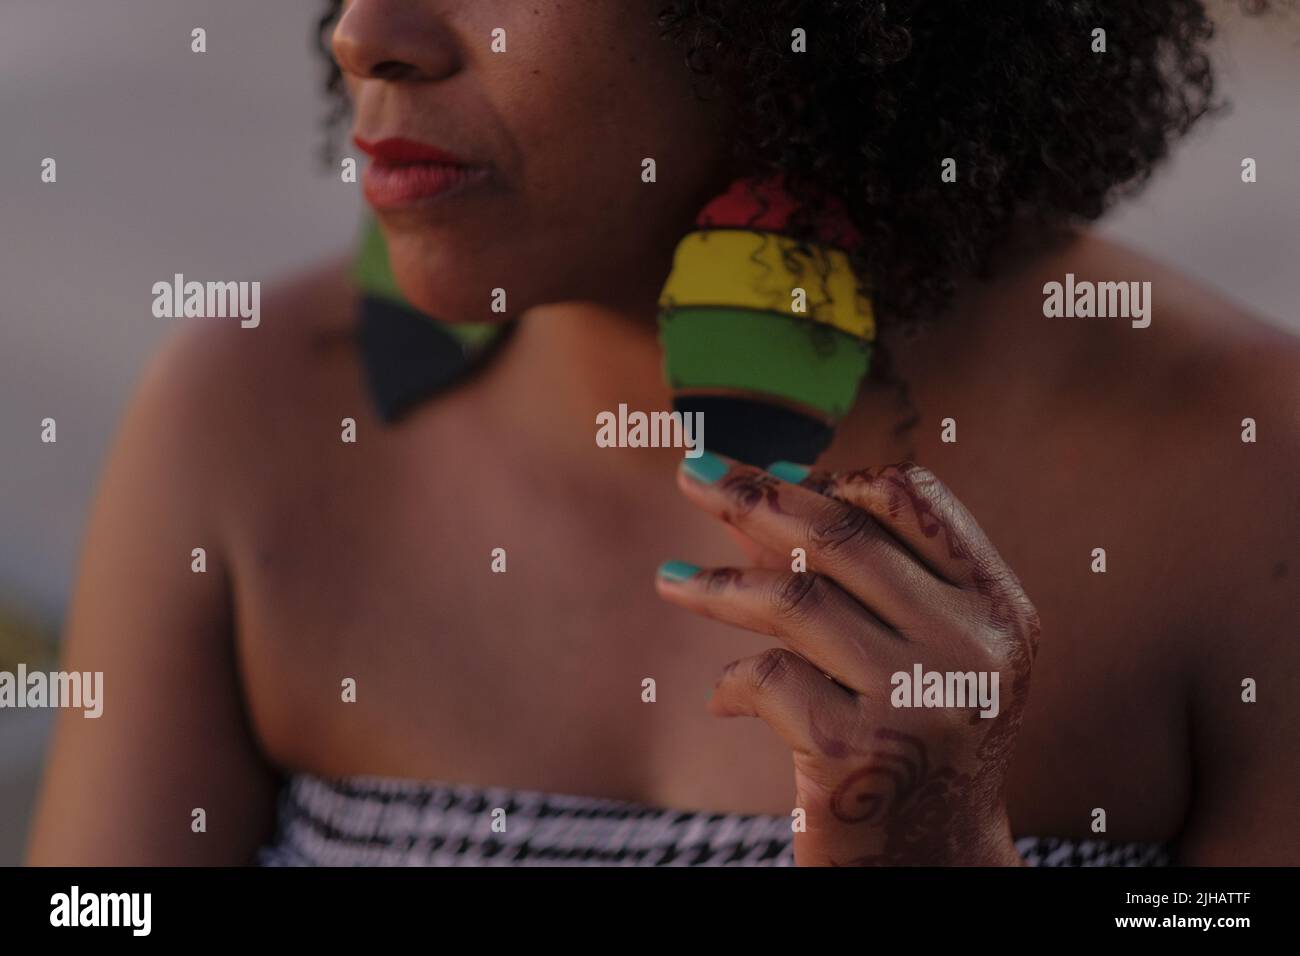 Black woman with afro hair holds big Rastafarian earring. Hand with Arabic henna tattoo and turquoise nails. Houndstooth tube top. Close crop of face. Stock Photo